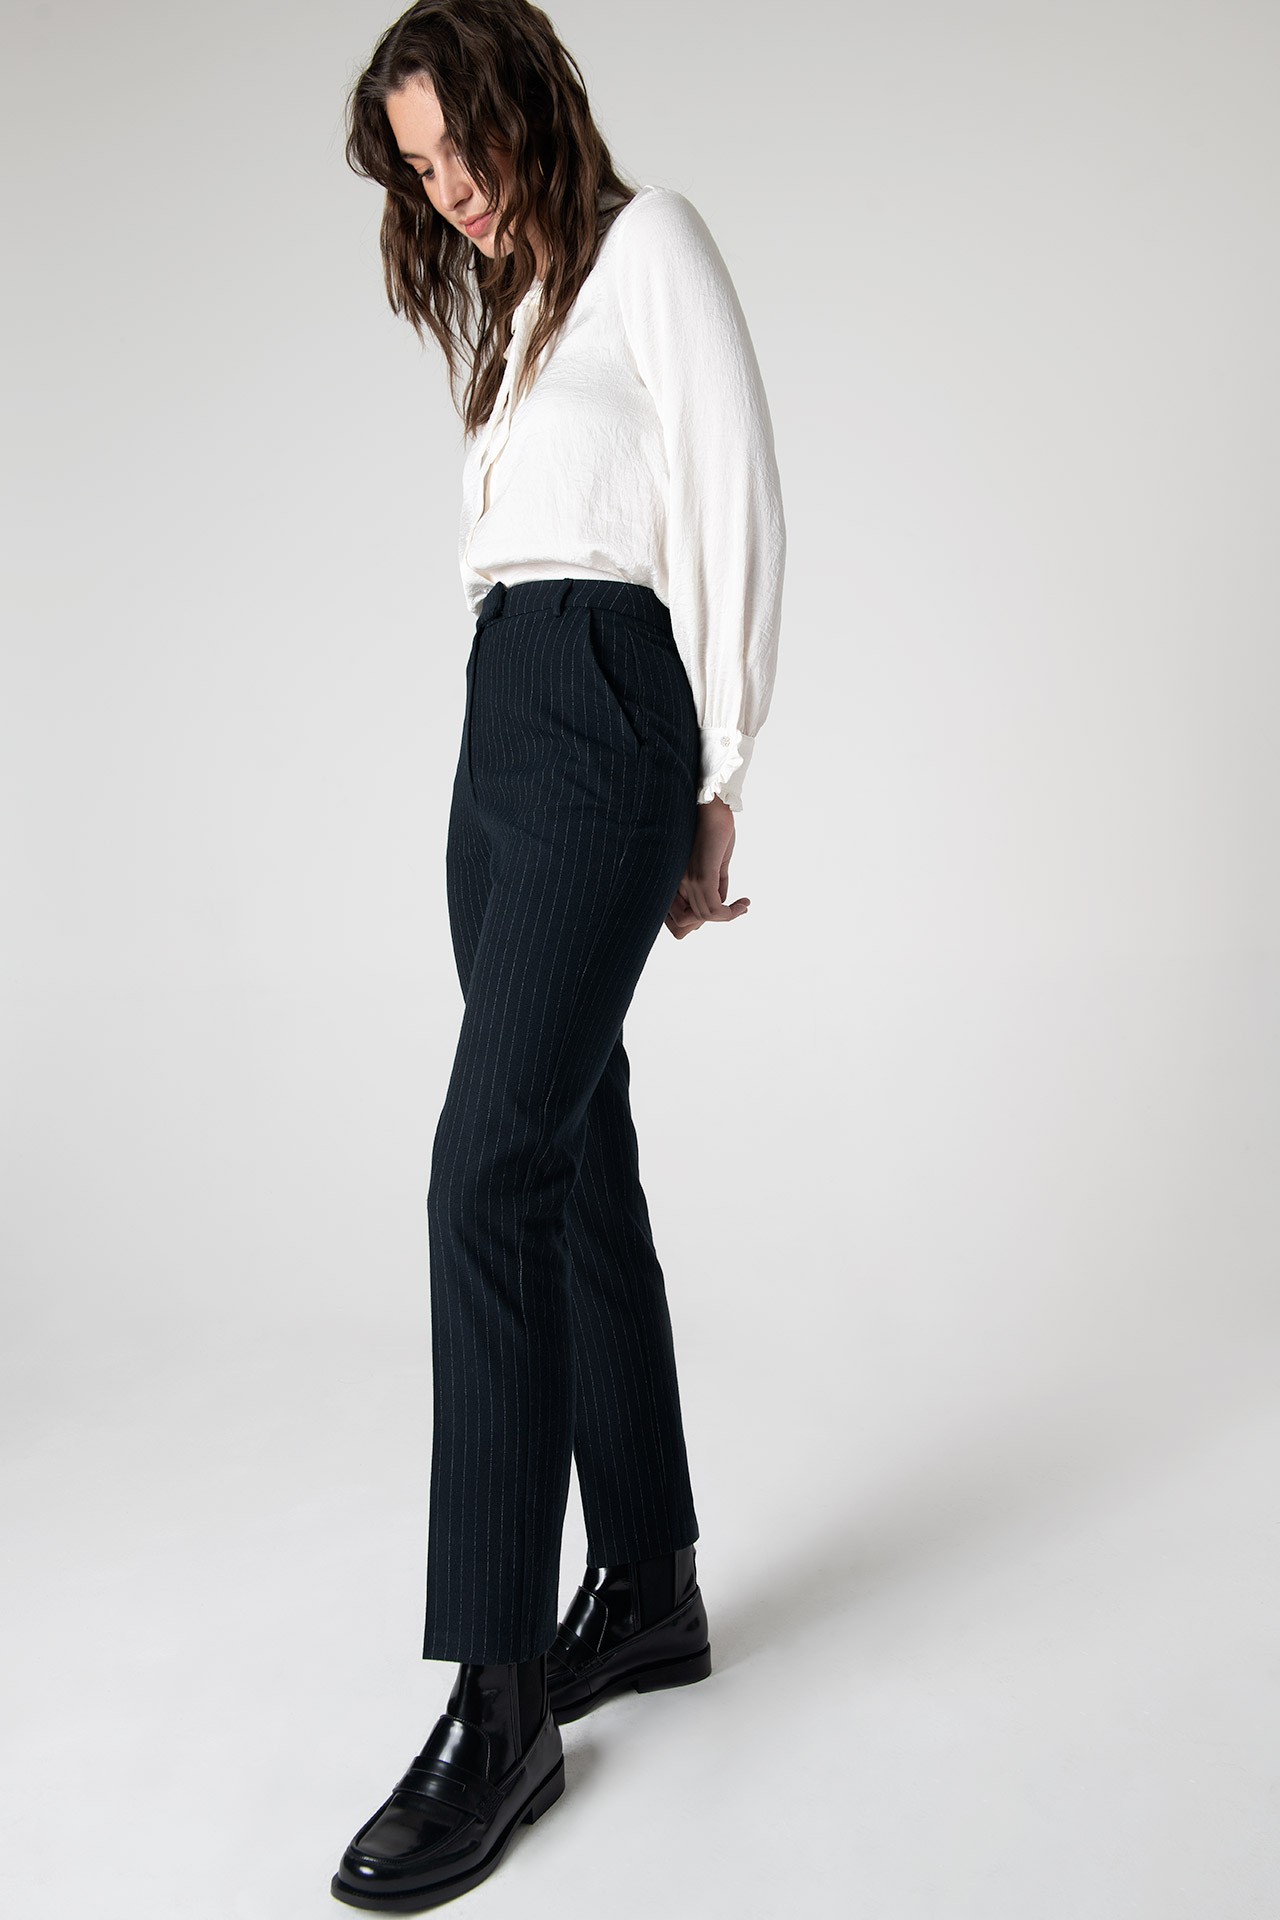 Mary Lacy Slim Fit Trousers - Koyu Lacivert